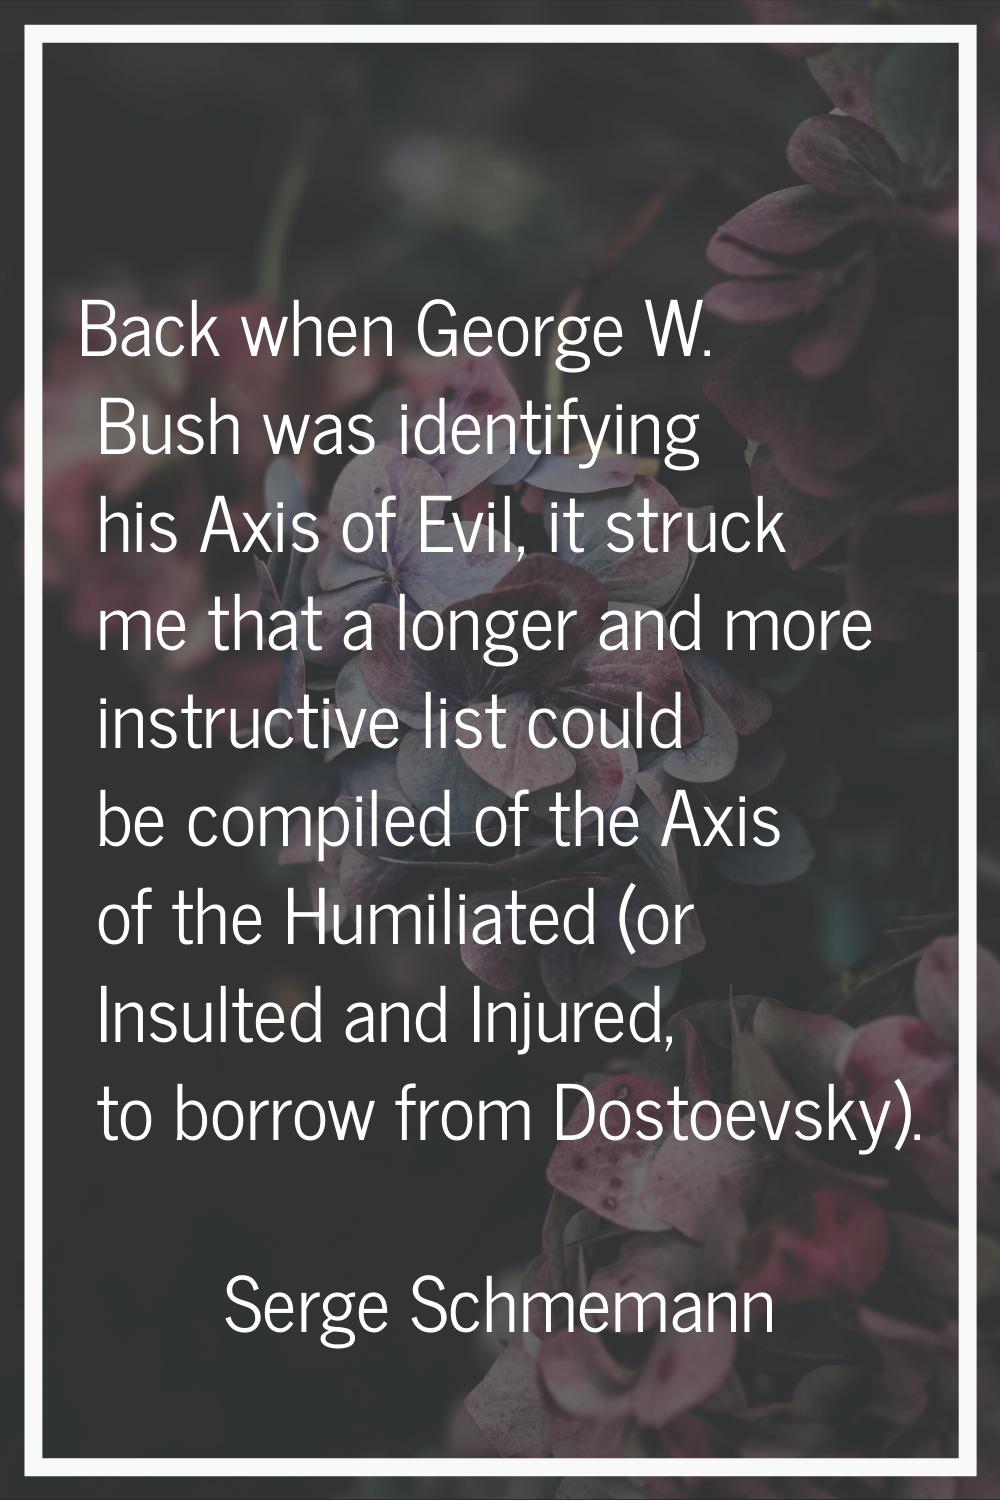 Back when George W. Bush was identifying his Axis of Evil, it struck me that a longer and more inst